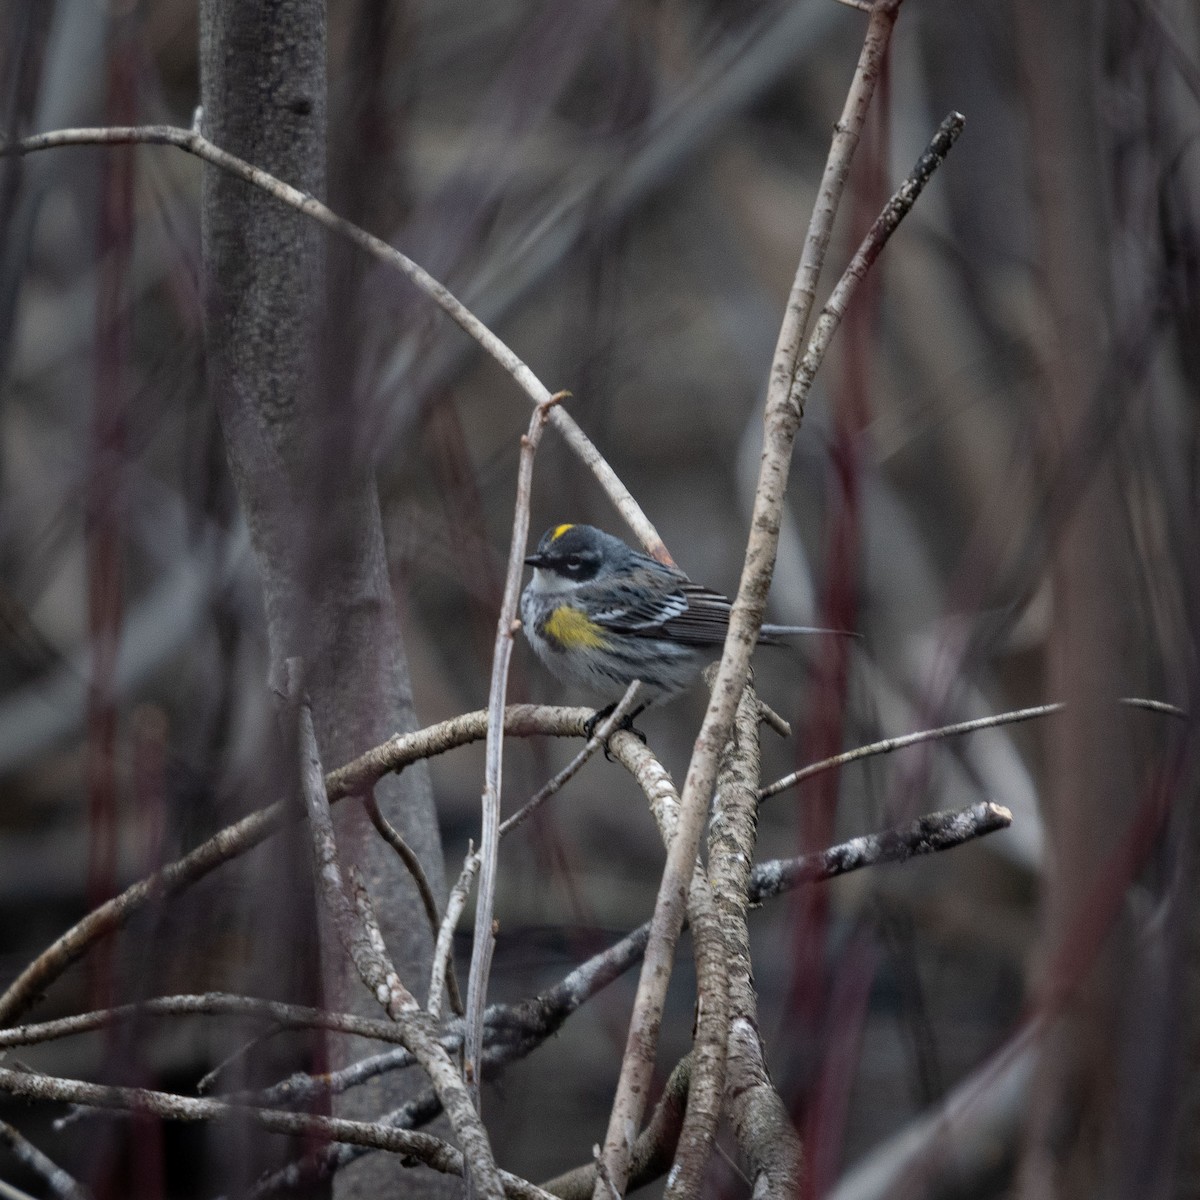 Yellow-rumped Warbler (Myrtle) - Deb Ford